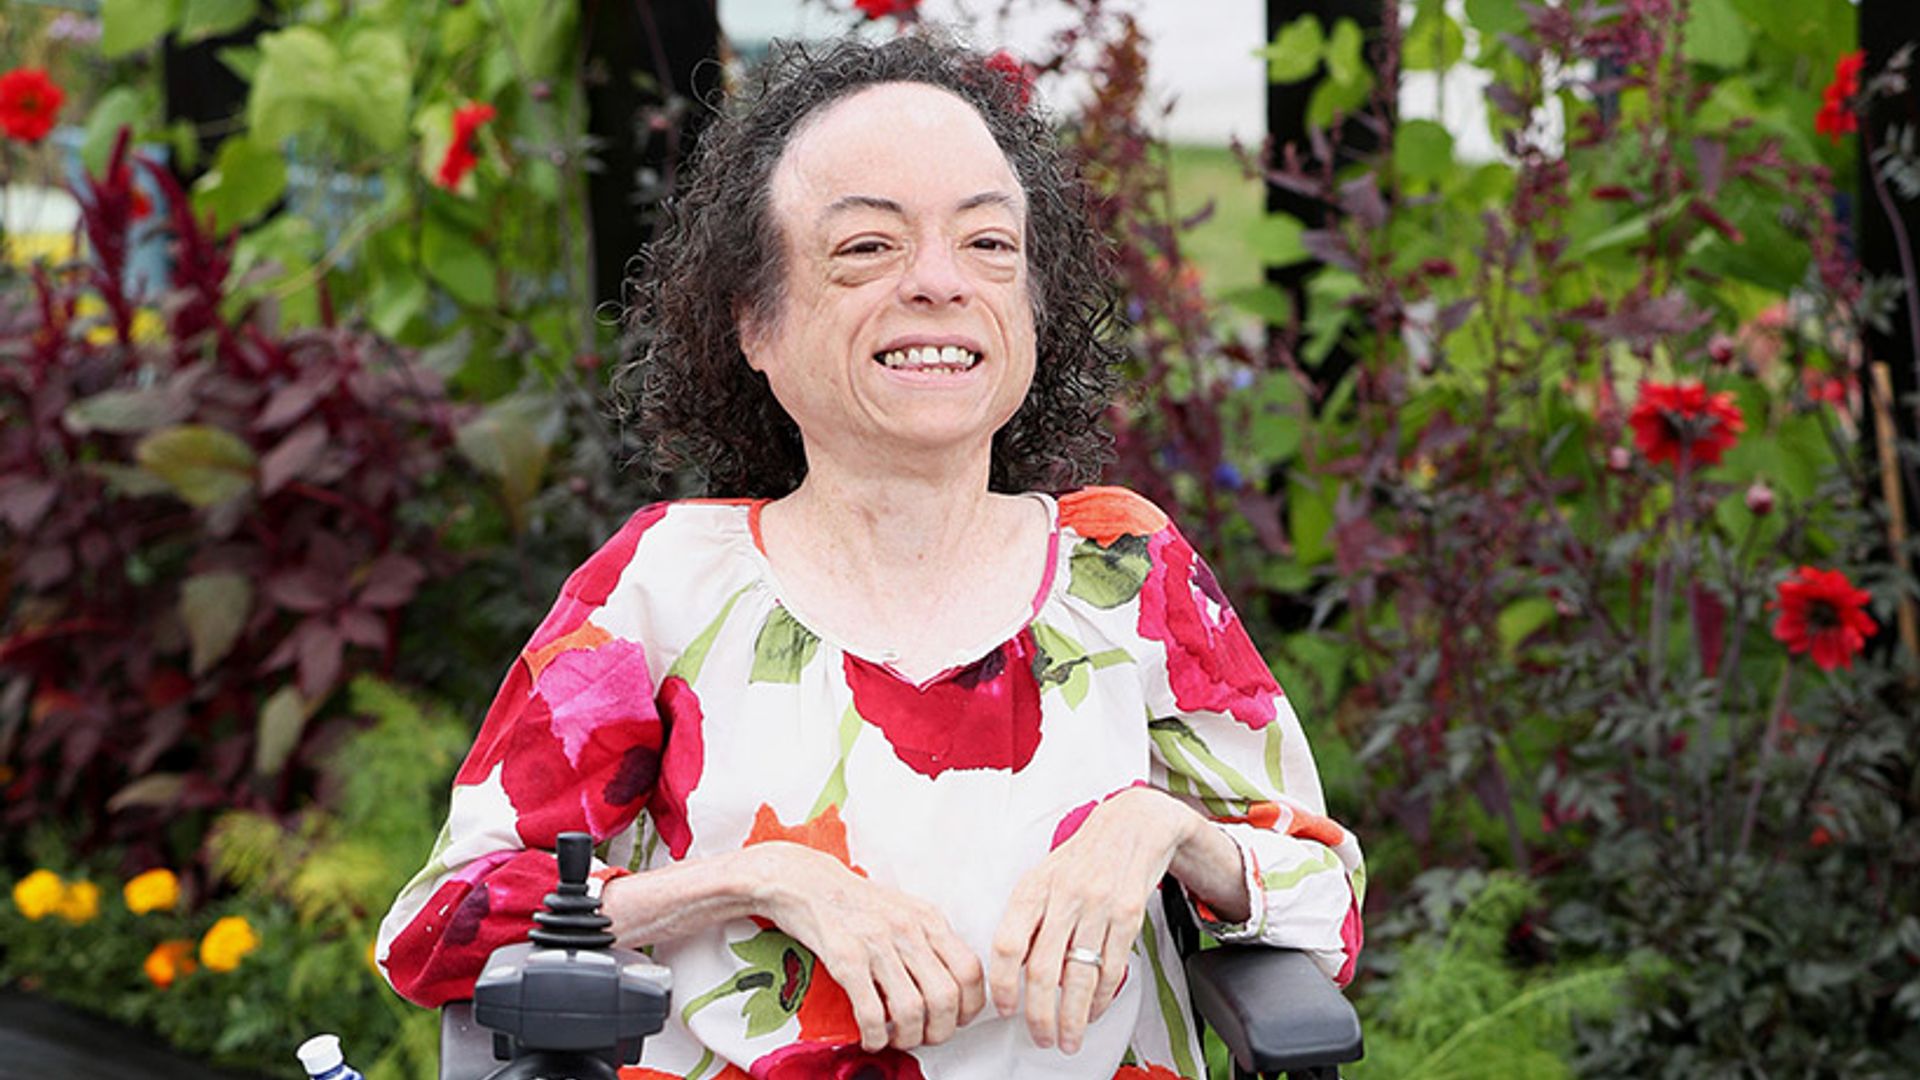 Silent Witness star Liz Carr rushed to hospital after horrific attack